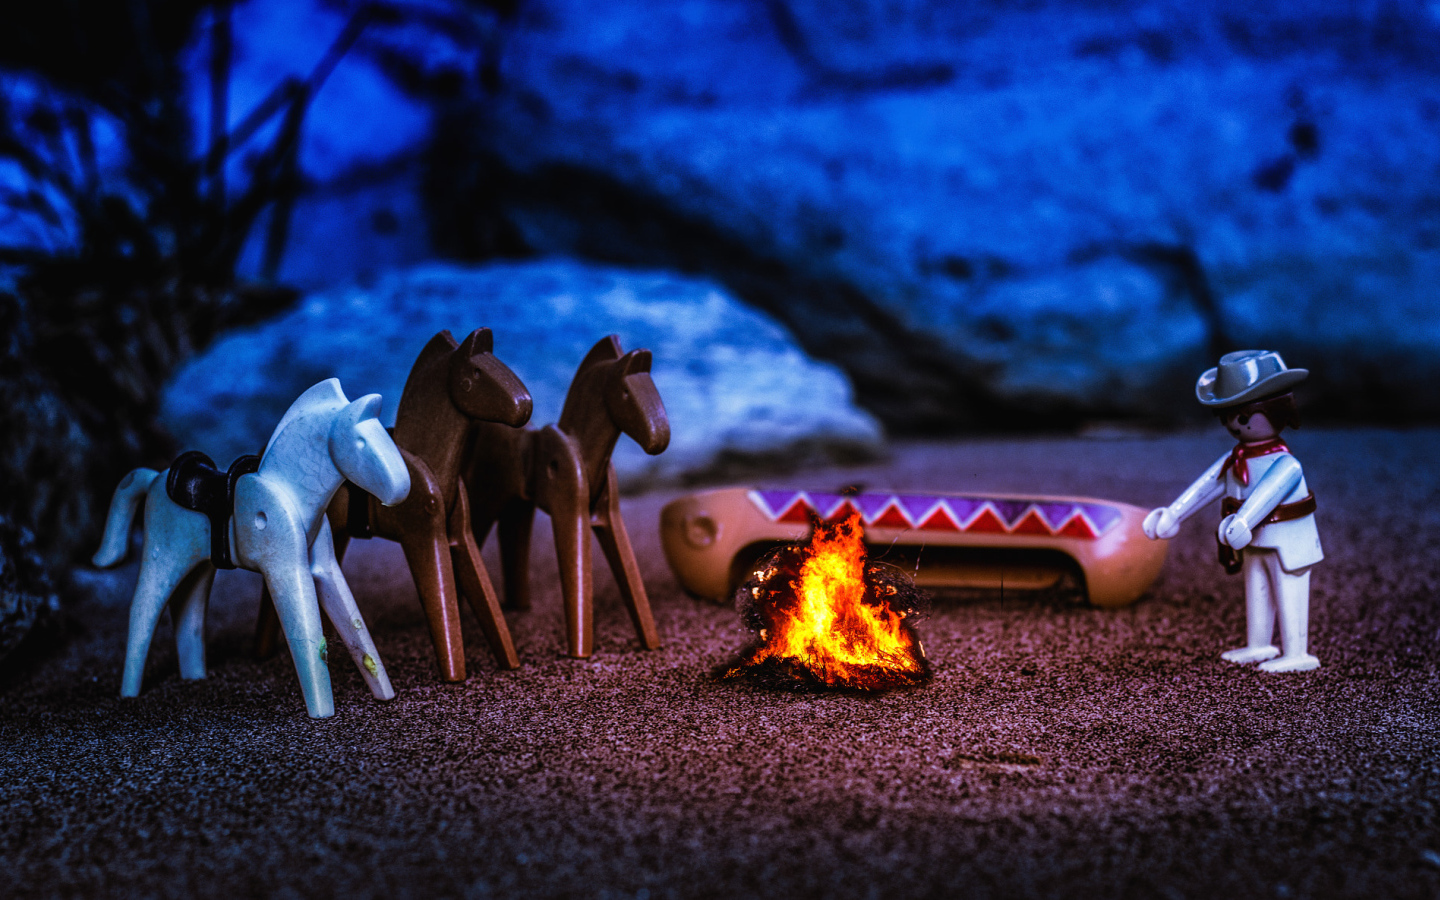 Lego toys are warming around the fire